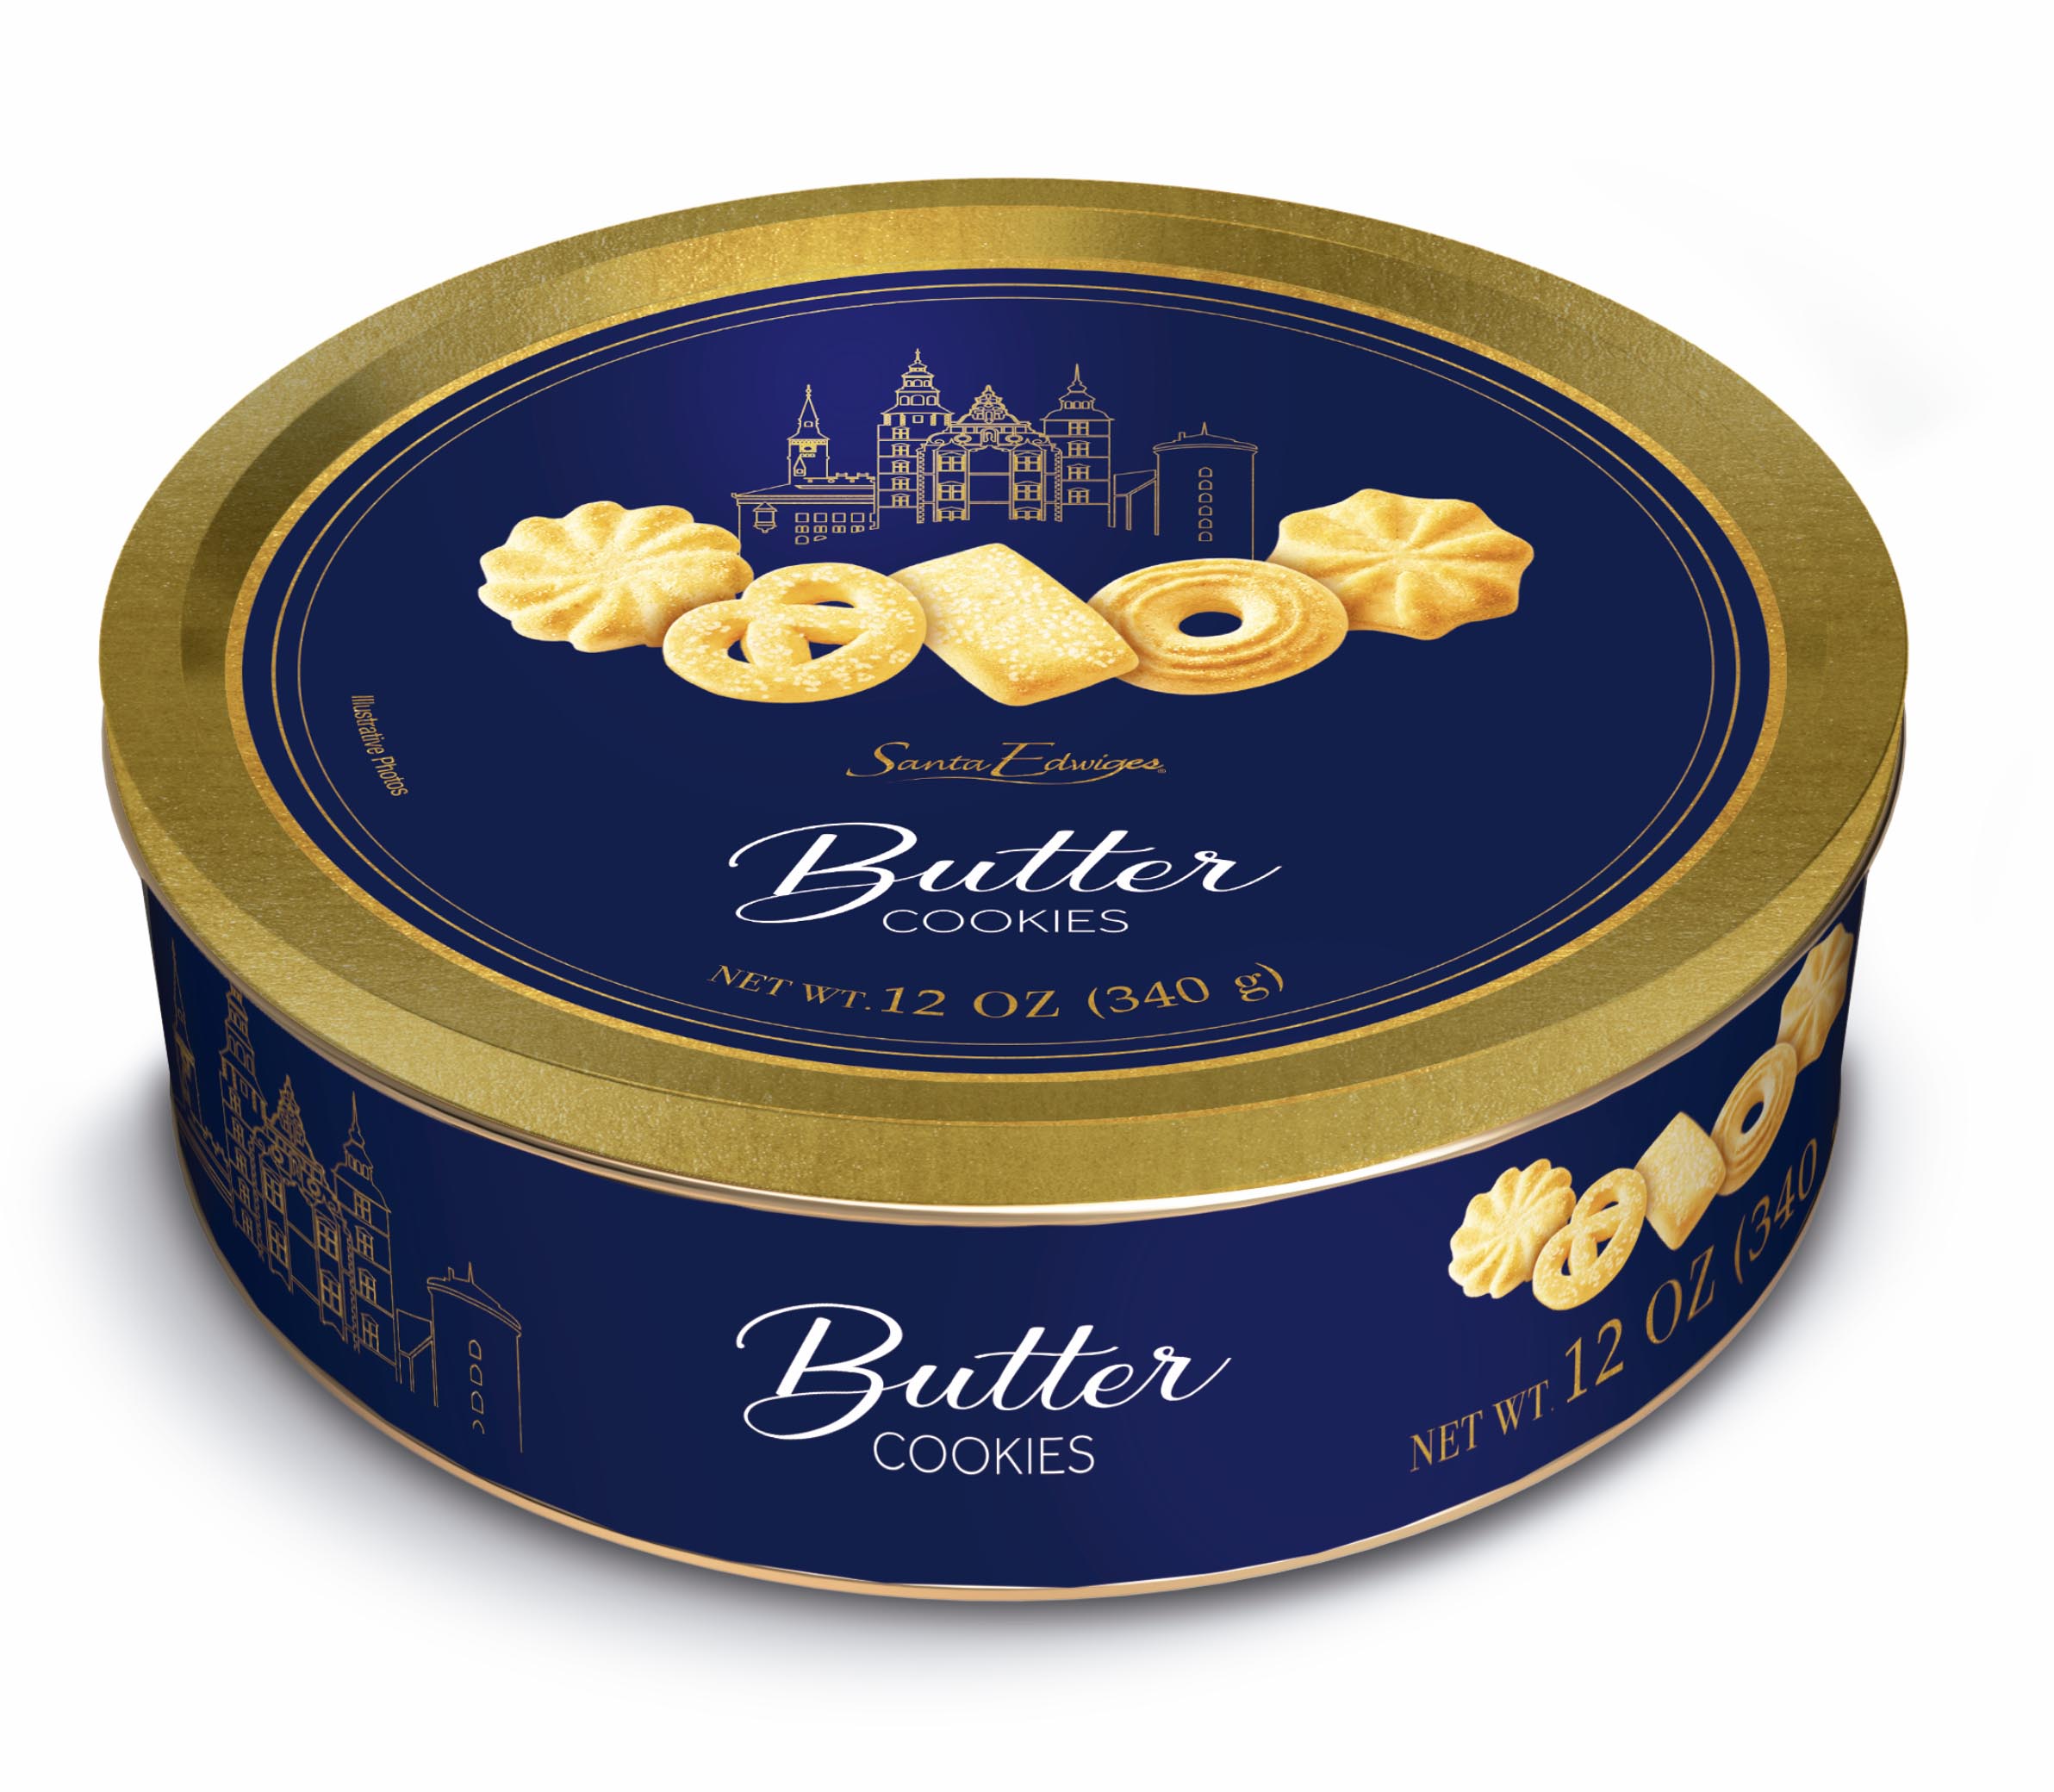 Butter Cookie Tin, Danish Style, 12 oz (340 g), Santa Edwiges - image 1 of 1